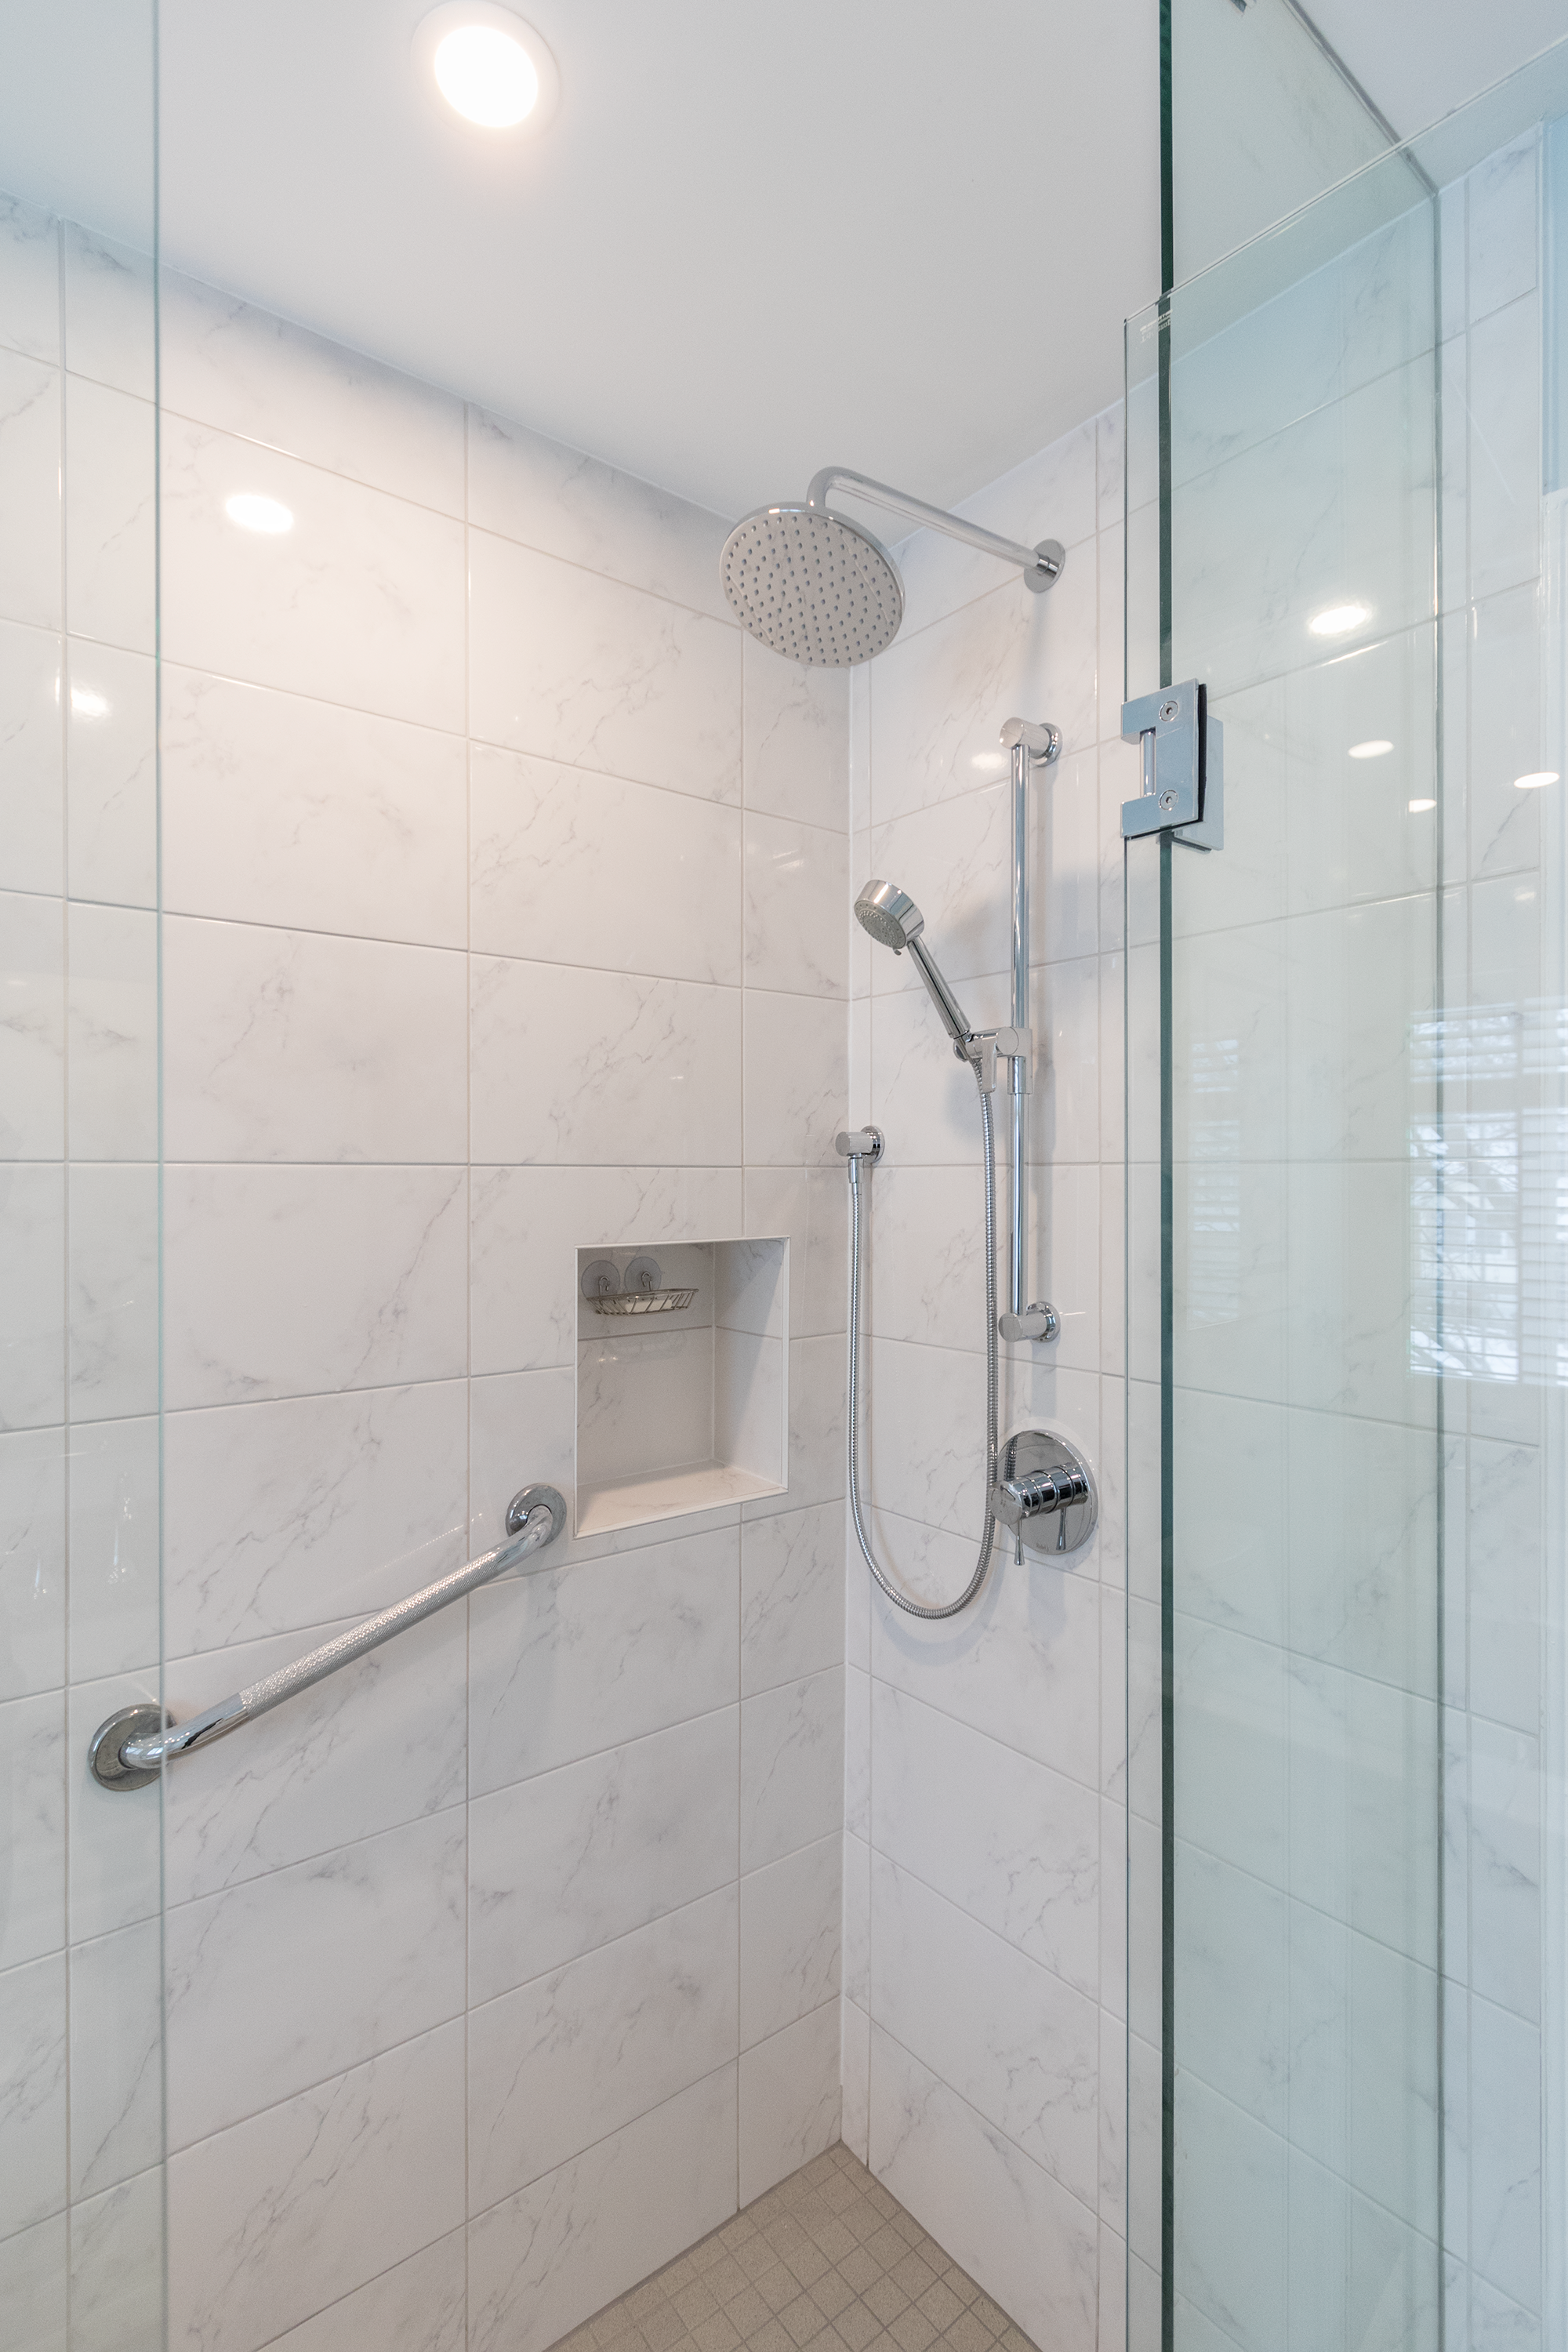 Converting Your Tub To A Walk In Shower, Bathroom Showers Tile